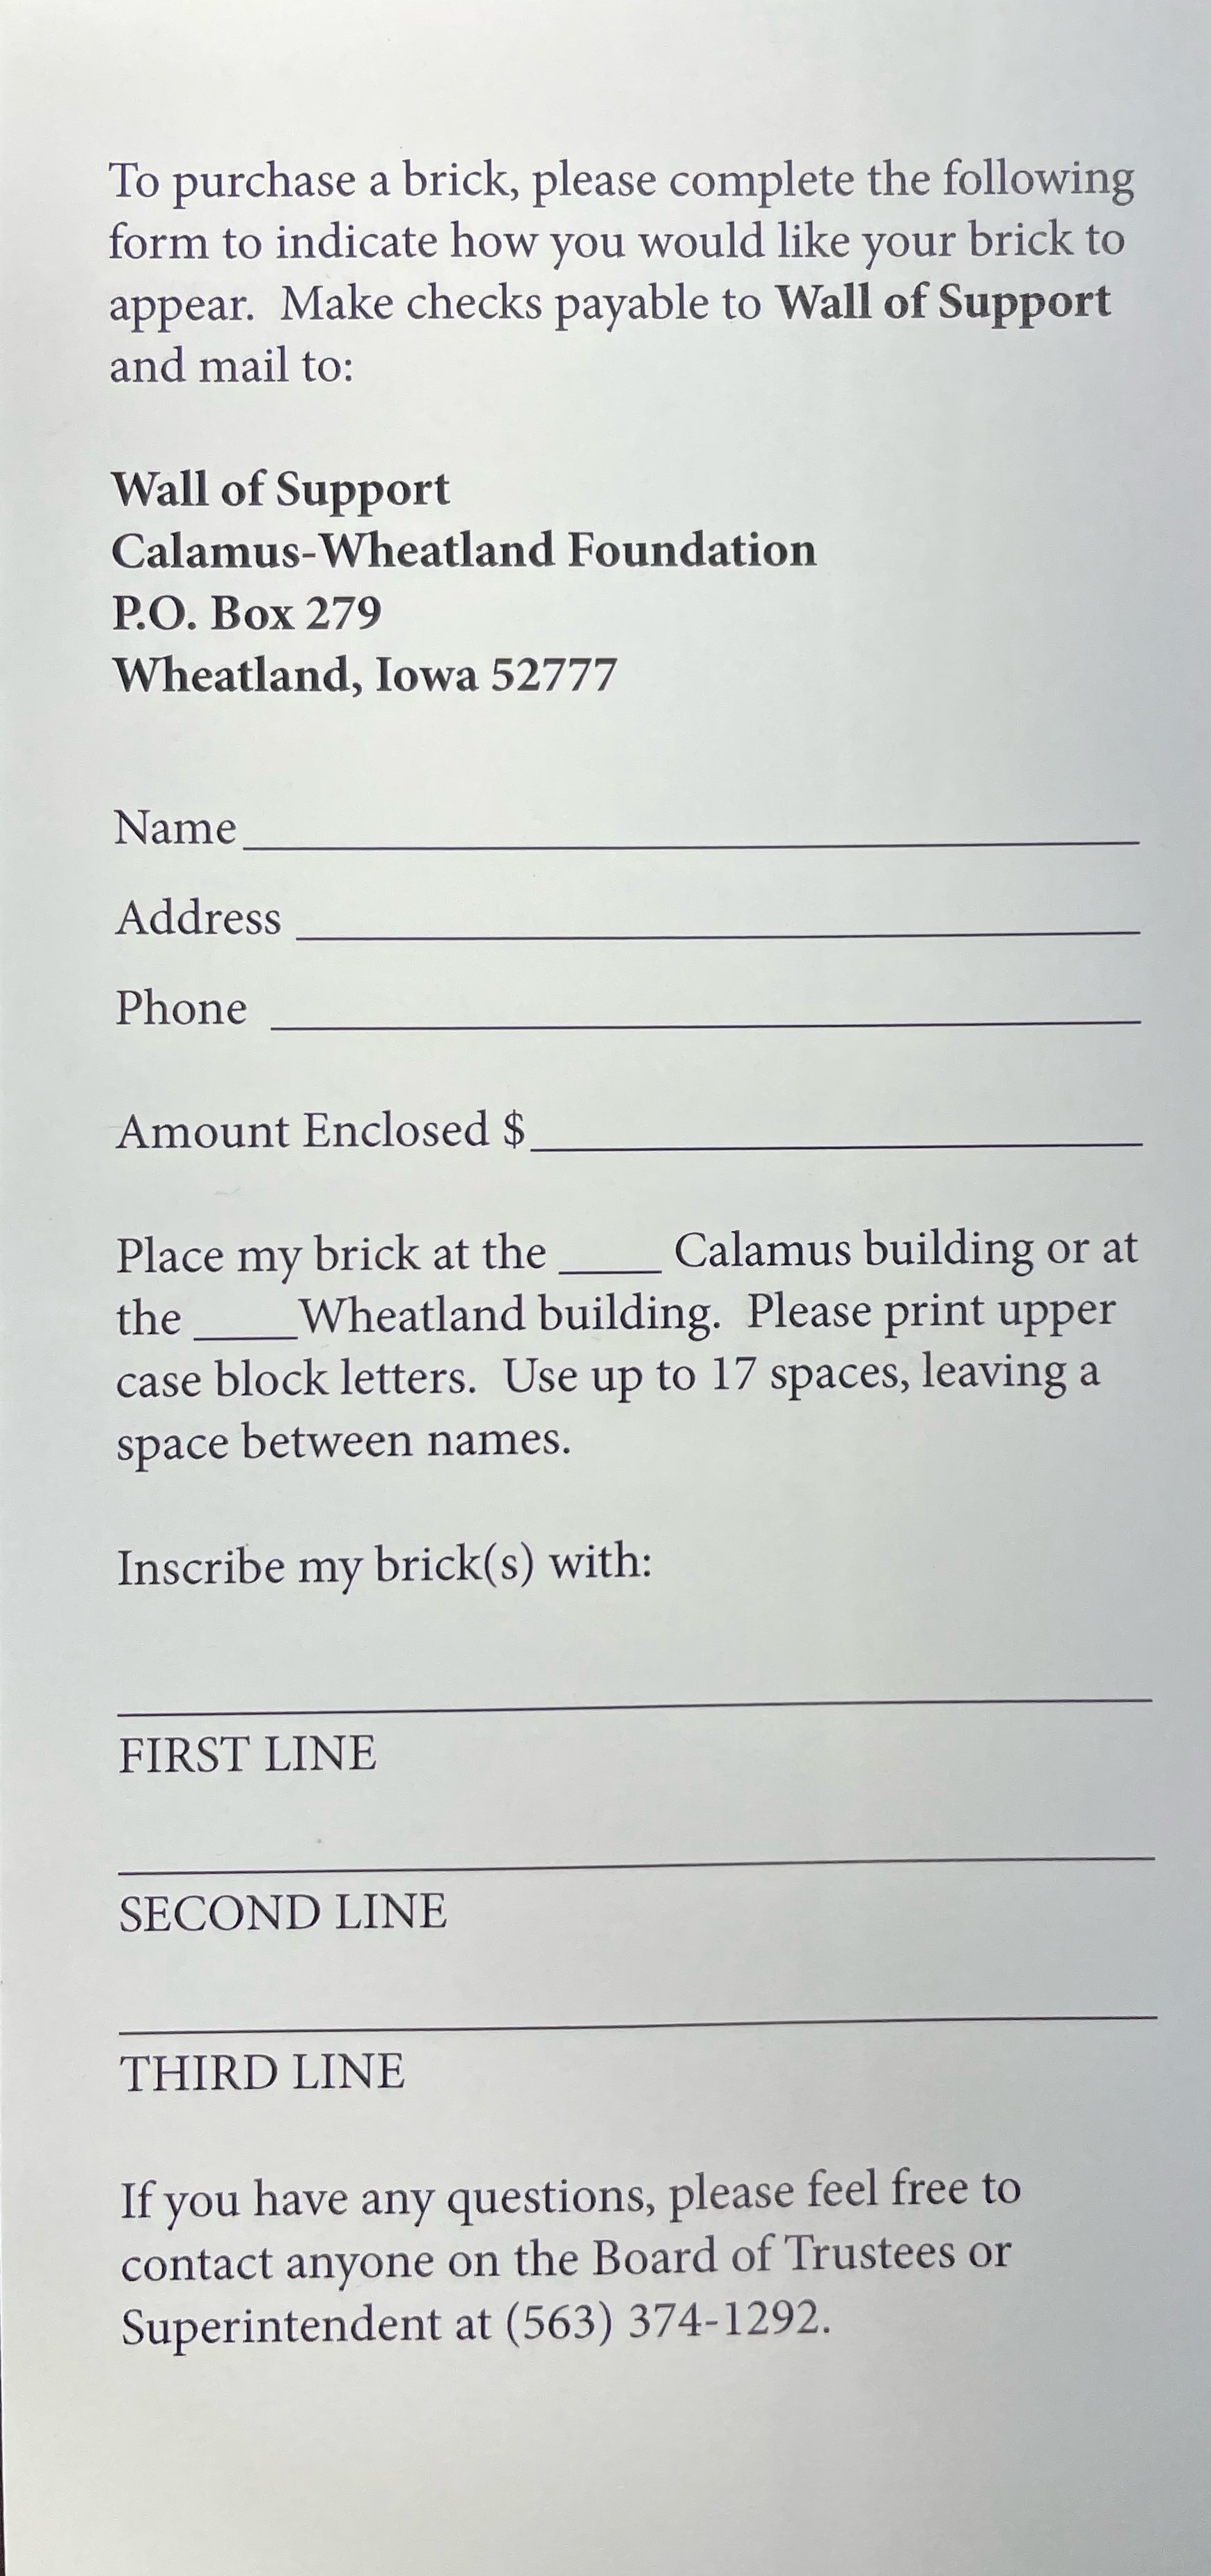 Wall of Support order form